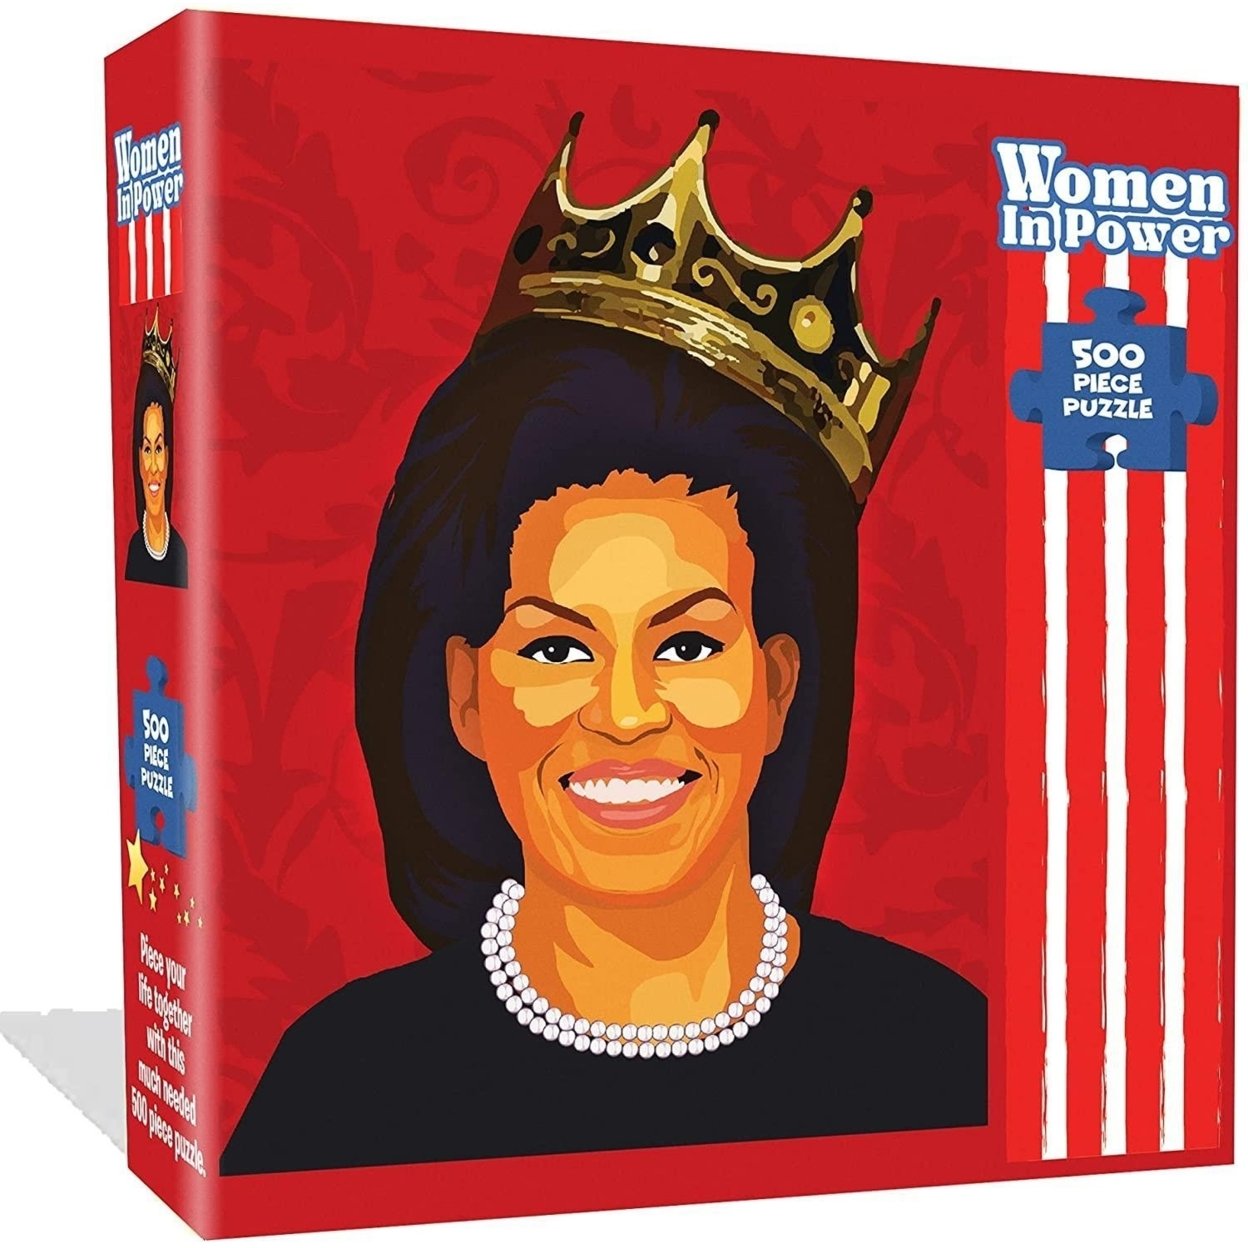 Michelle Obama Jigsaw Puzzle 500pcs Women In Power Illustration Design All Ages Mighty Mojo